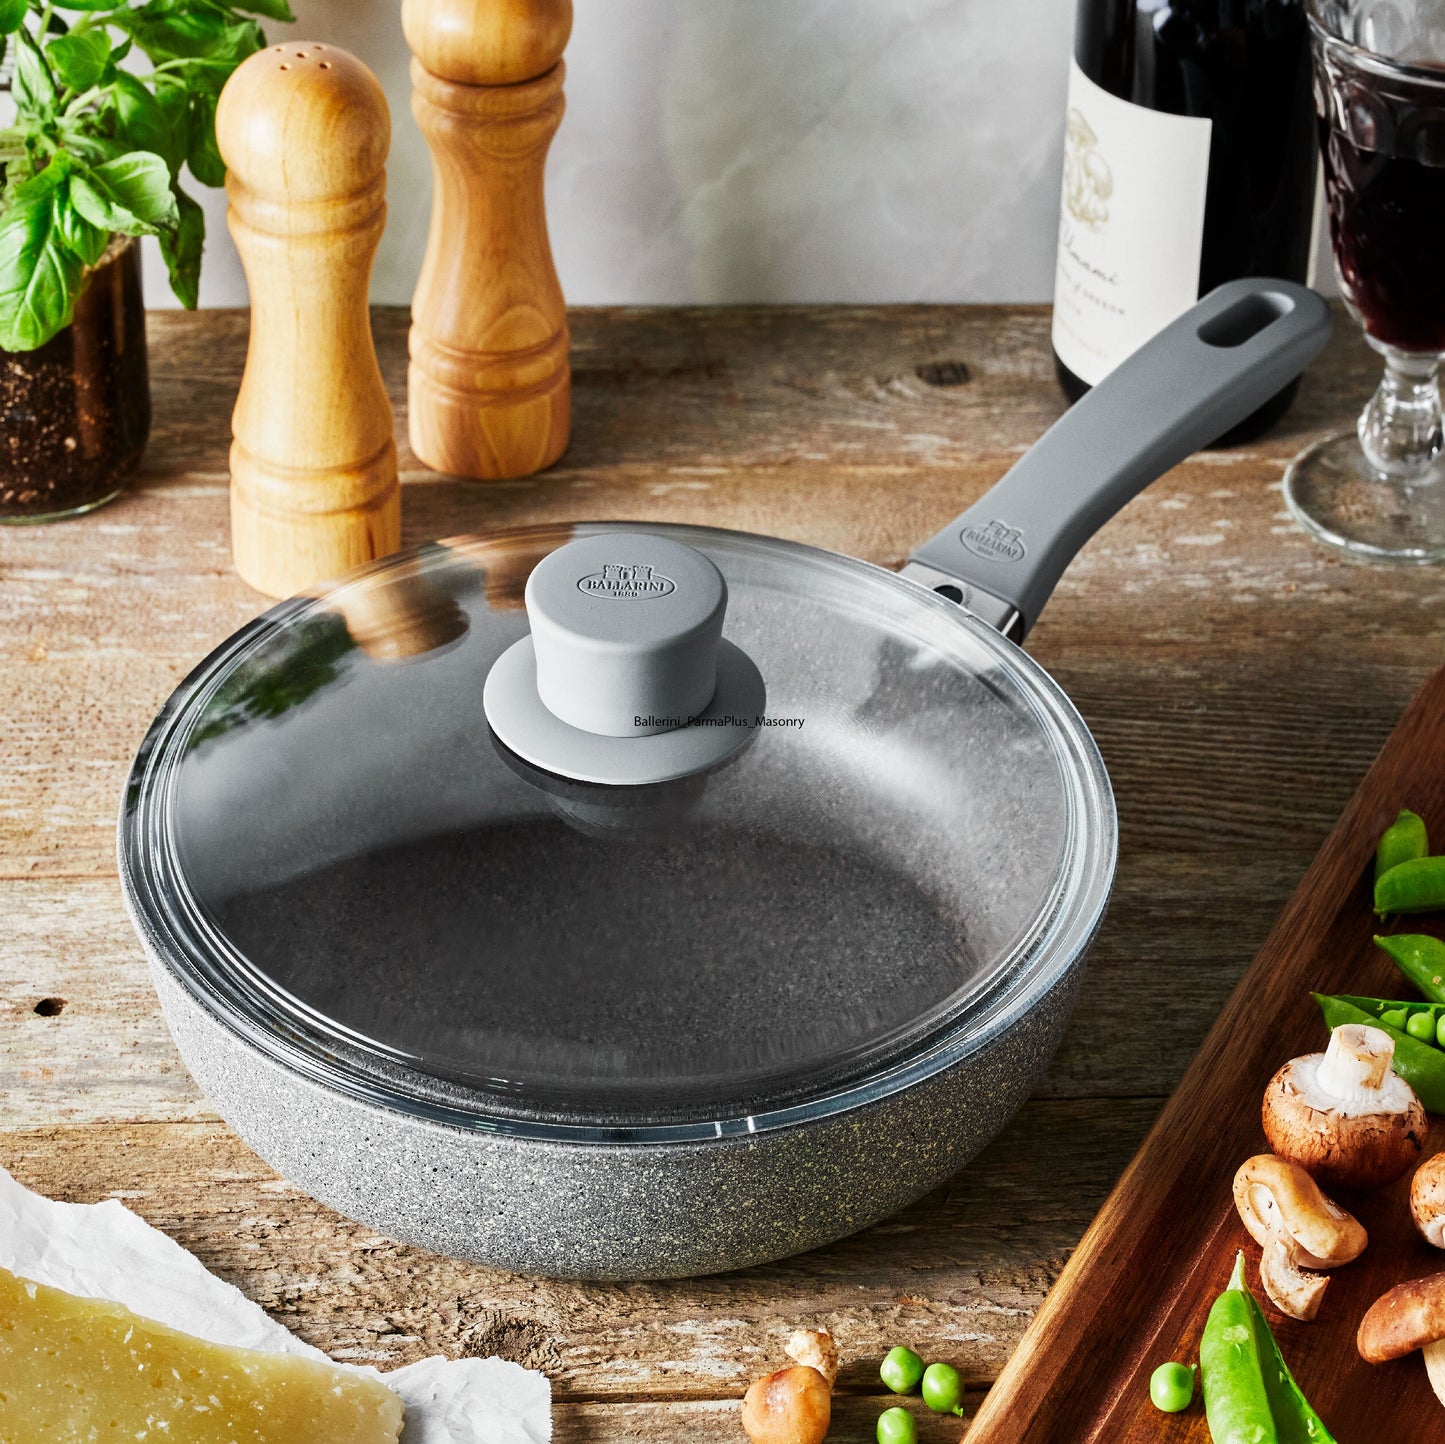 saute pan with lid set on a wooden table with veggies, wine bottles, and seasoning around it.